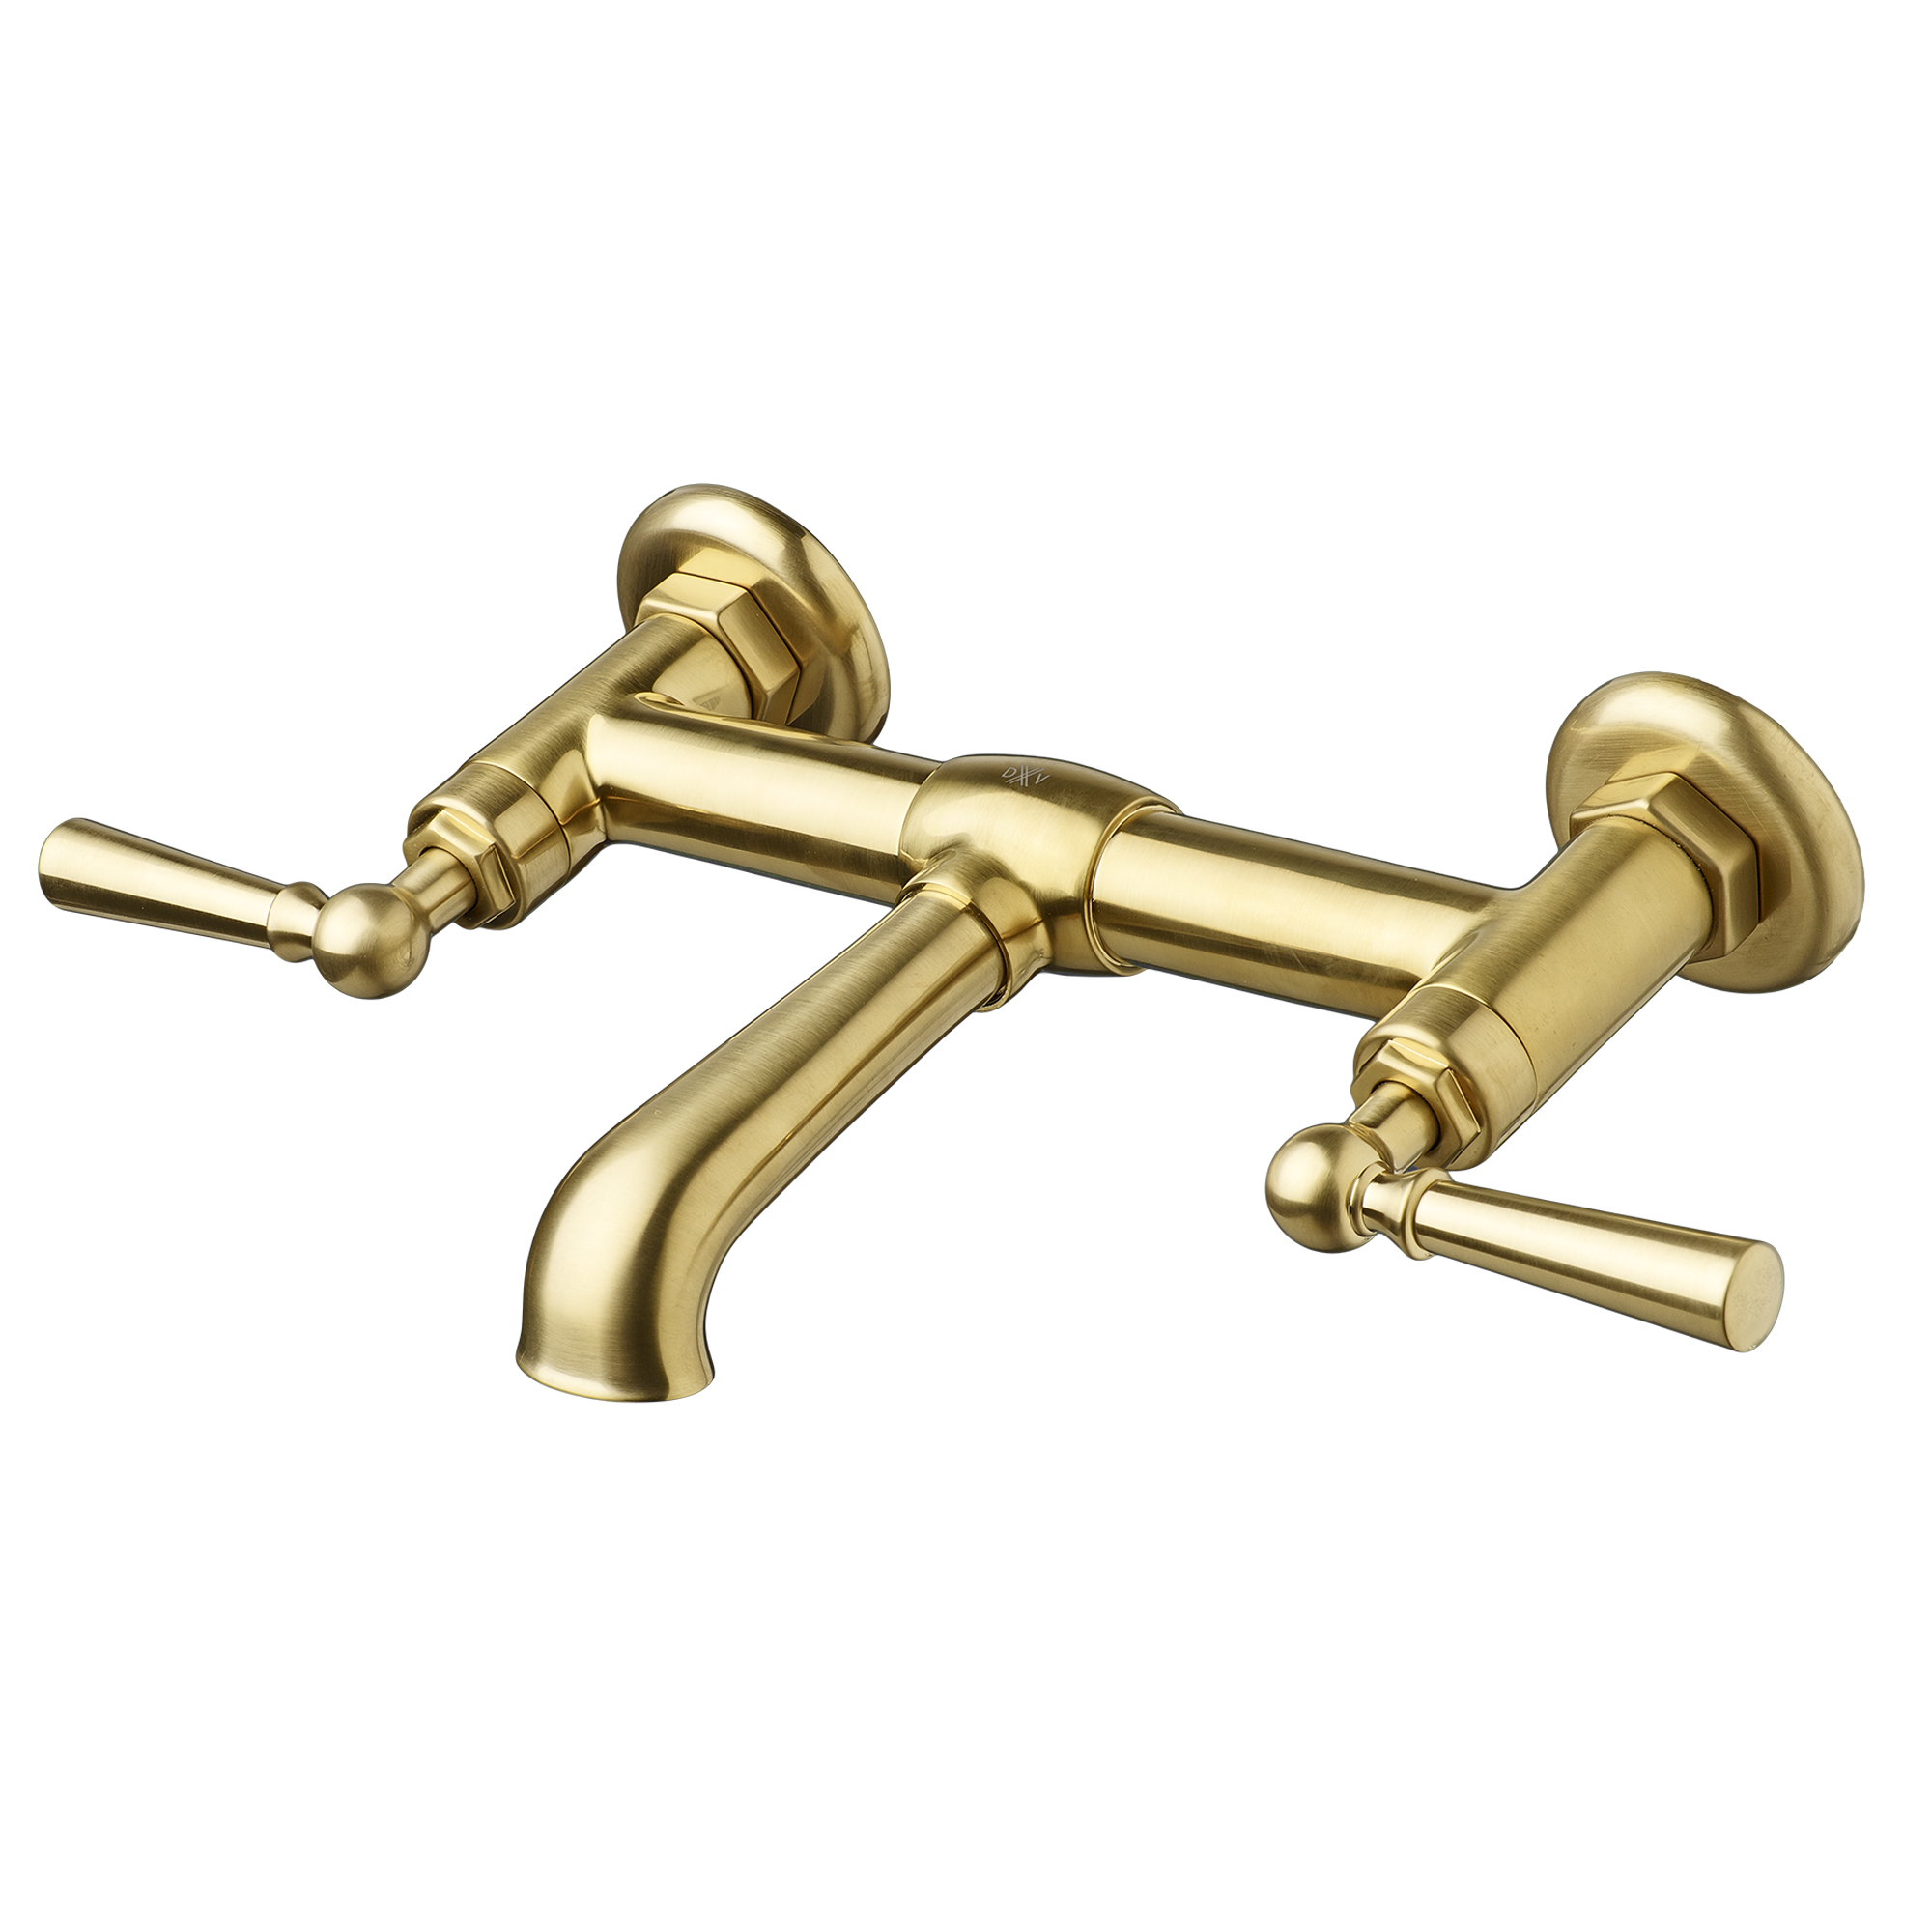 Oak Hill 2-Handle Wall Mount Bathroom Faucet with Lever Handles